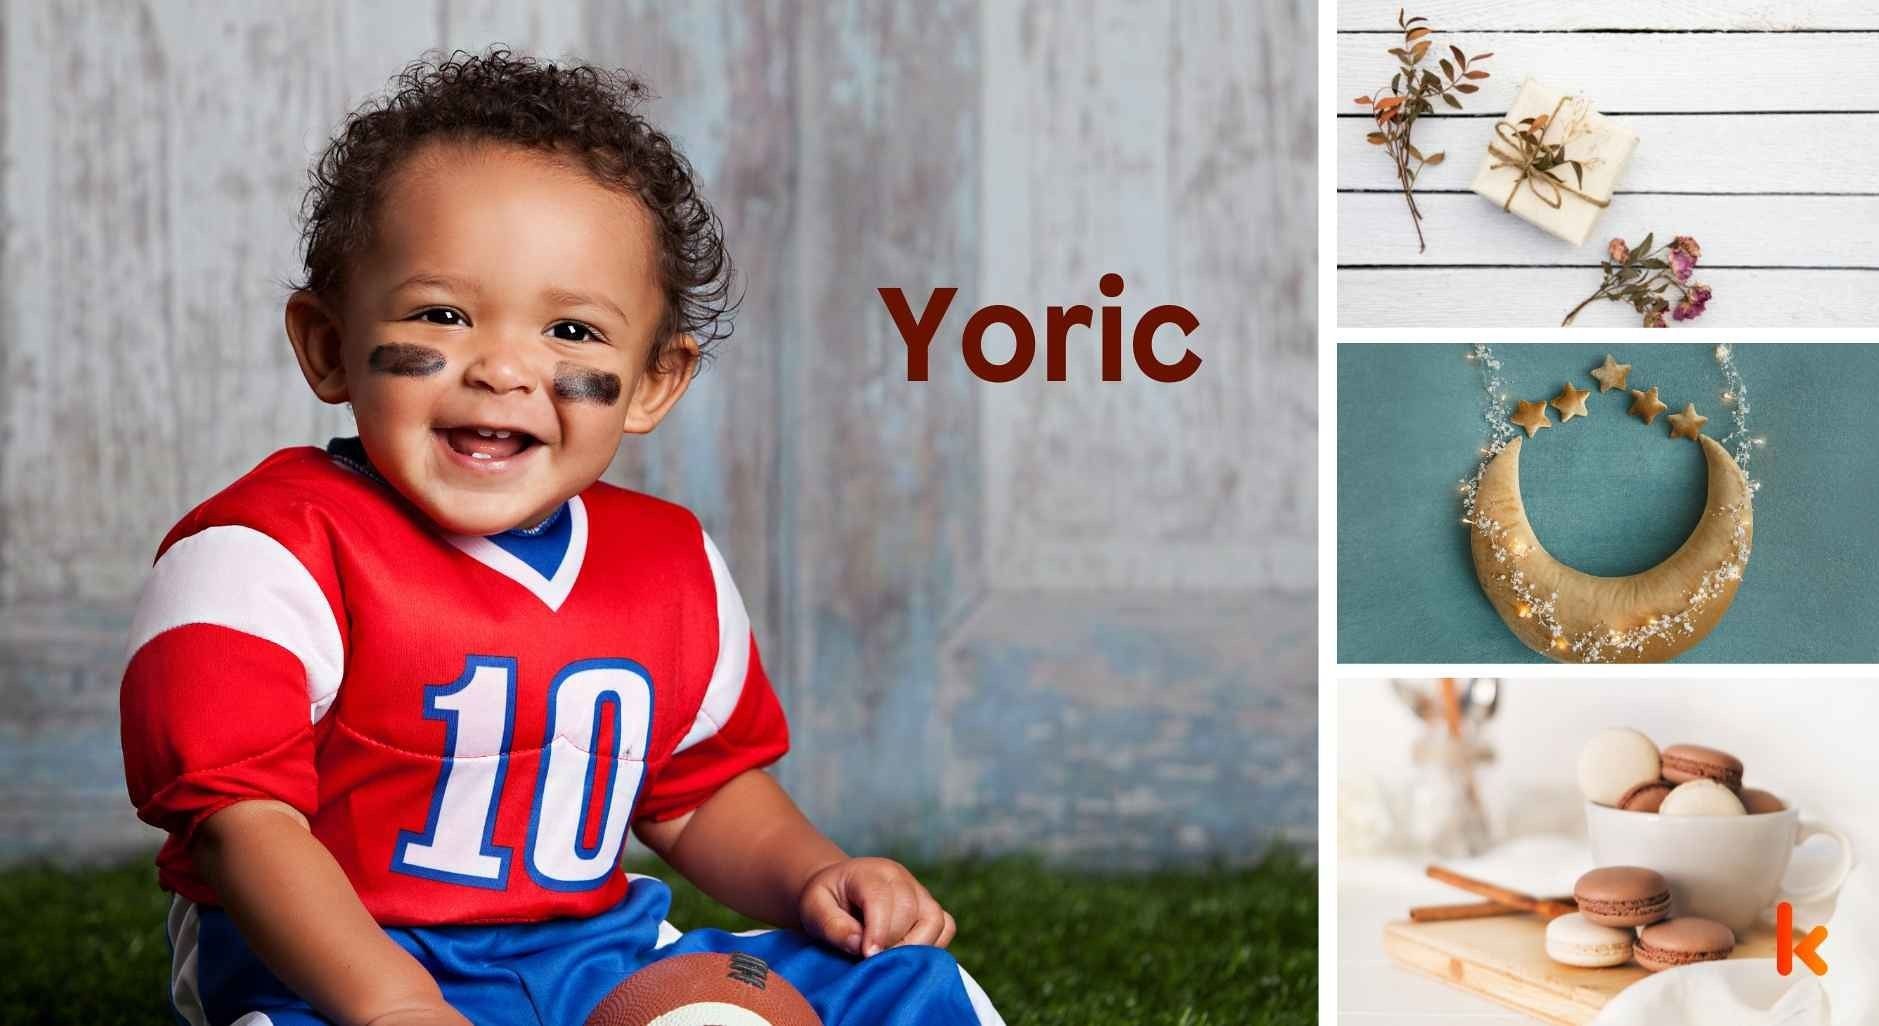 Meaning of the name Yoric